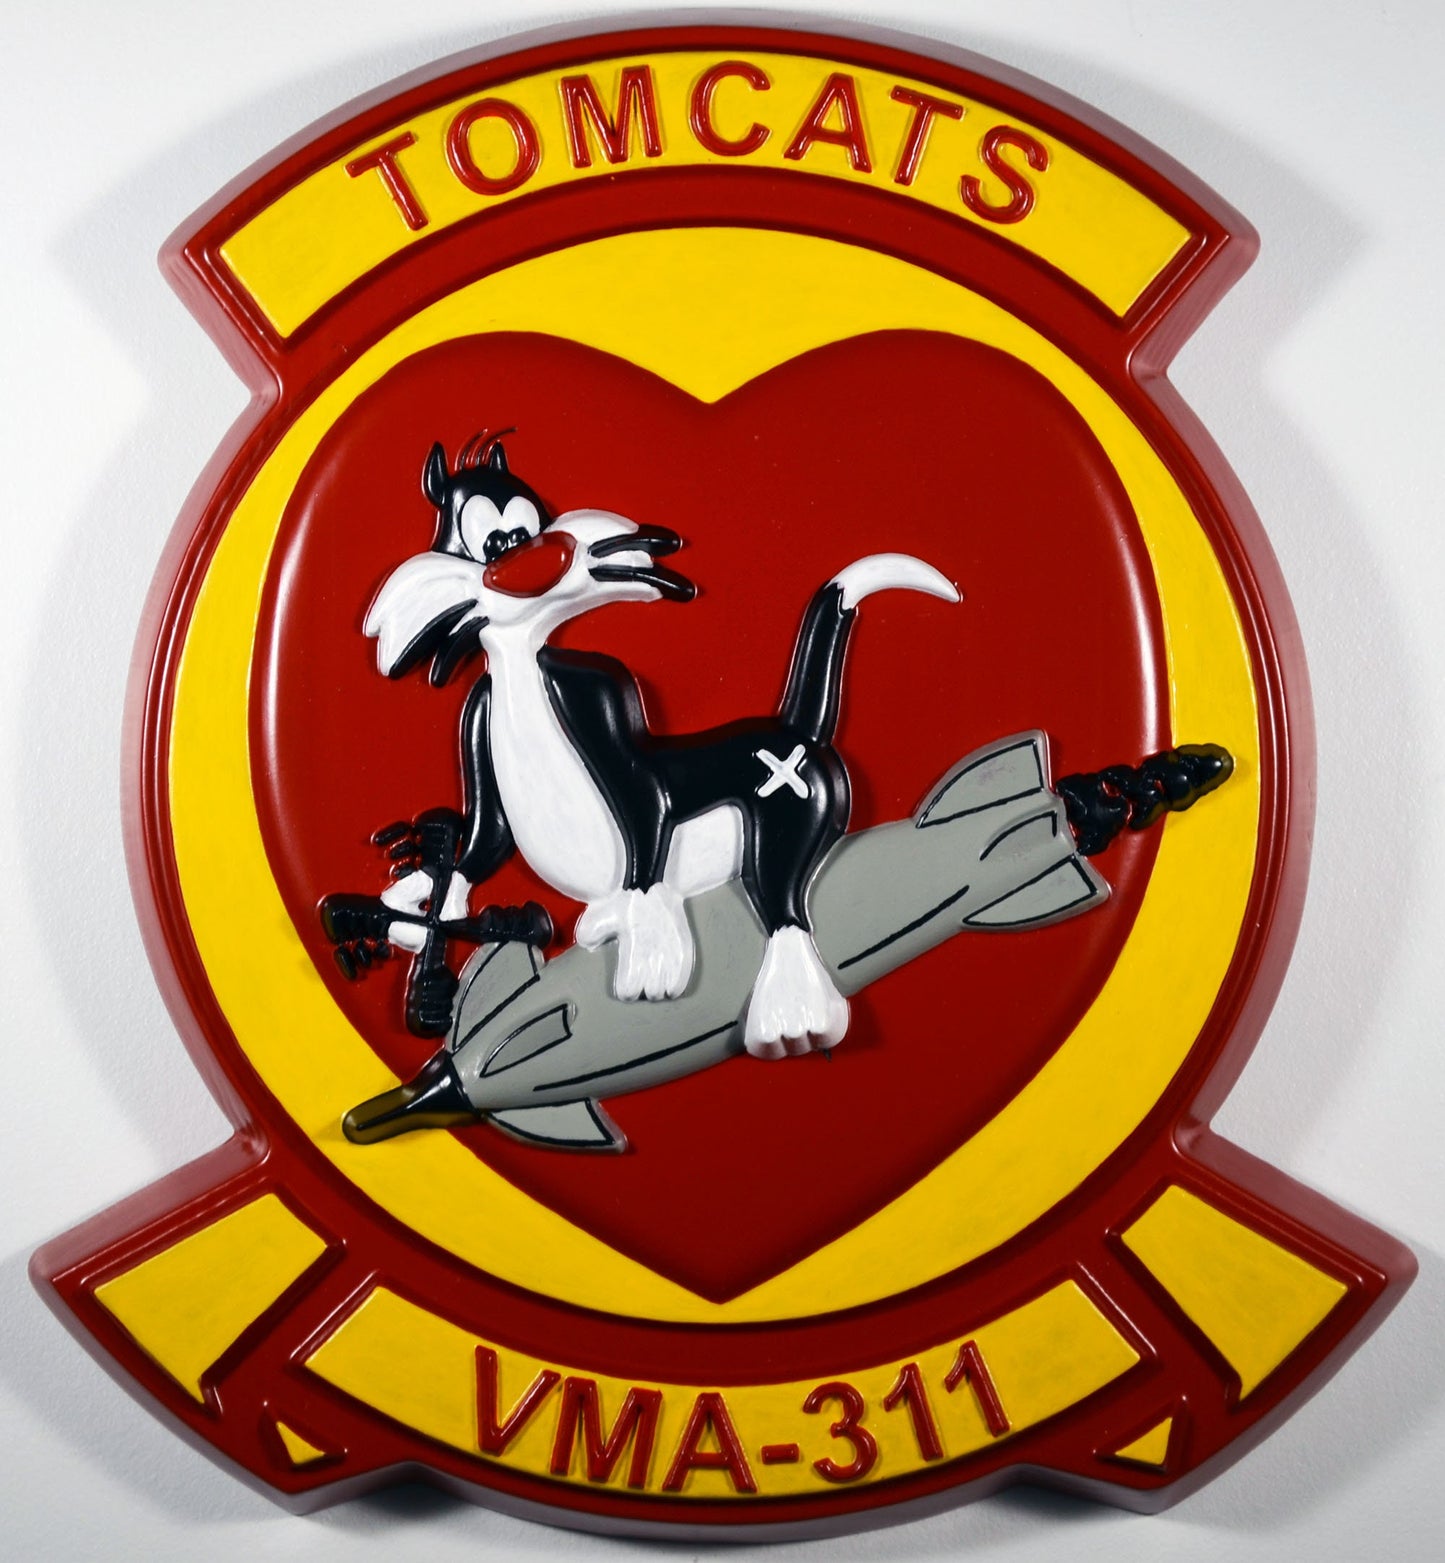 USMC Fighter Attack Squadron VMFA-311, Tomcats, CNC 3d wood carving, military plaque